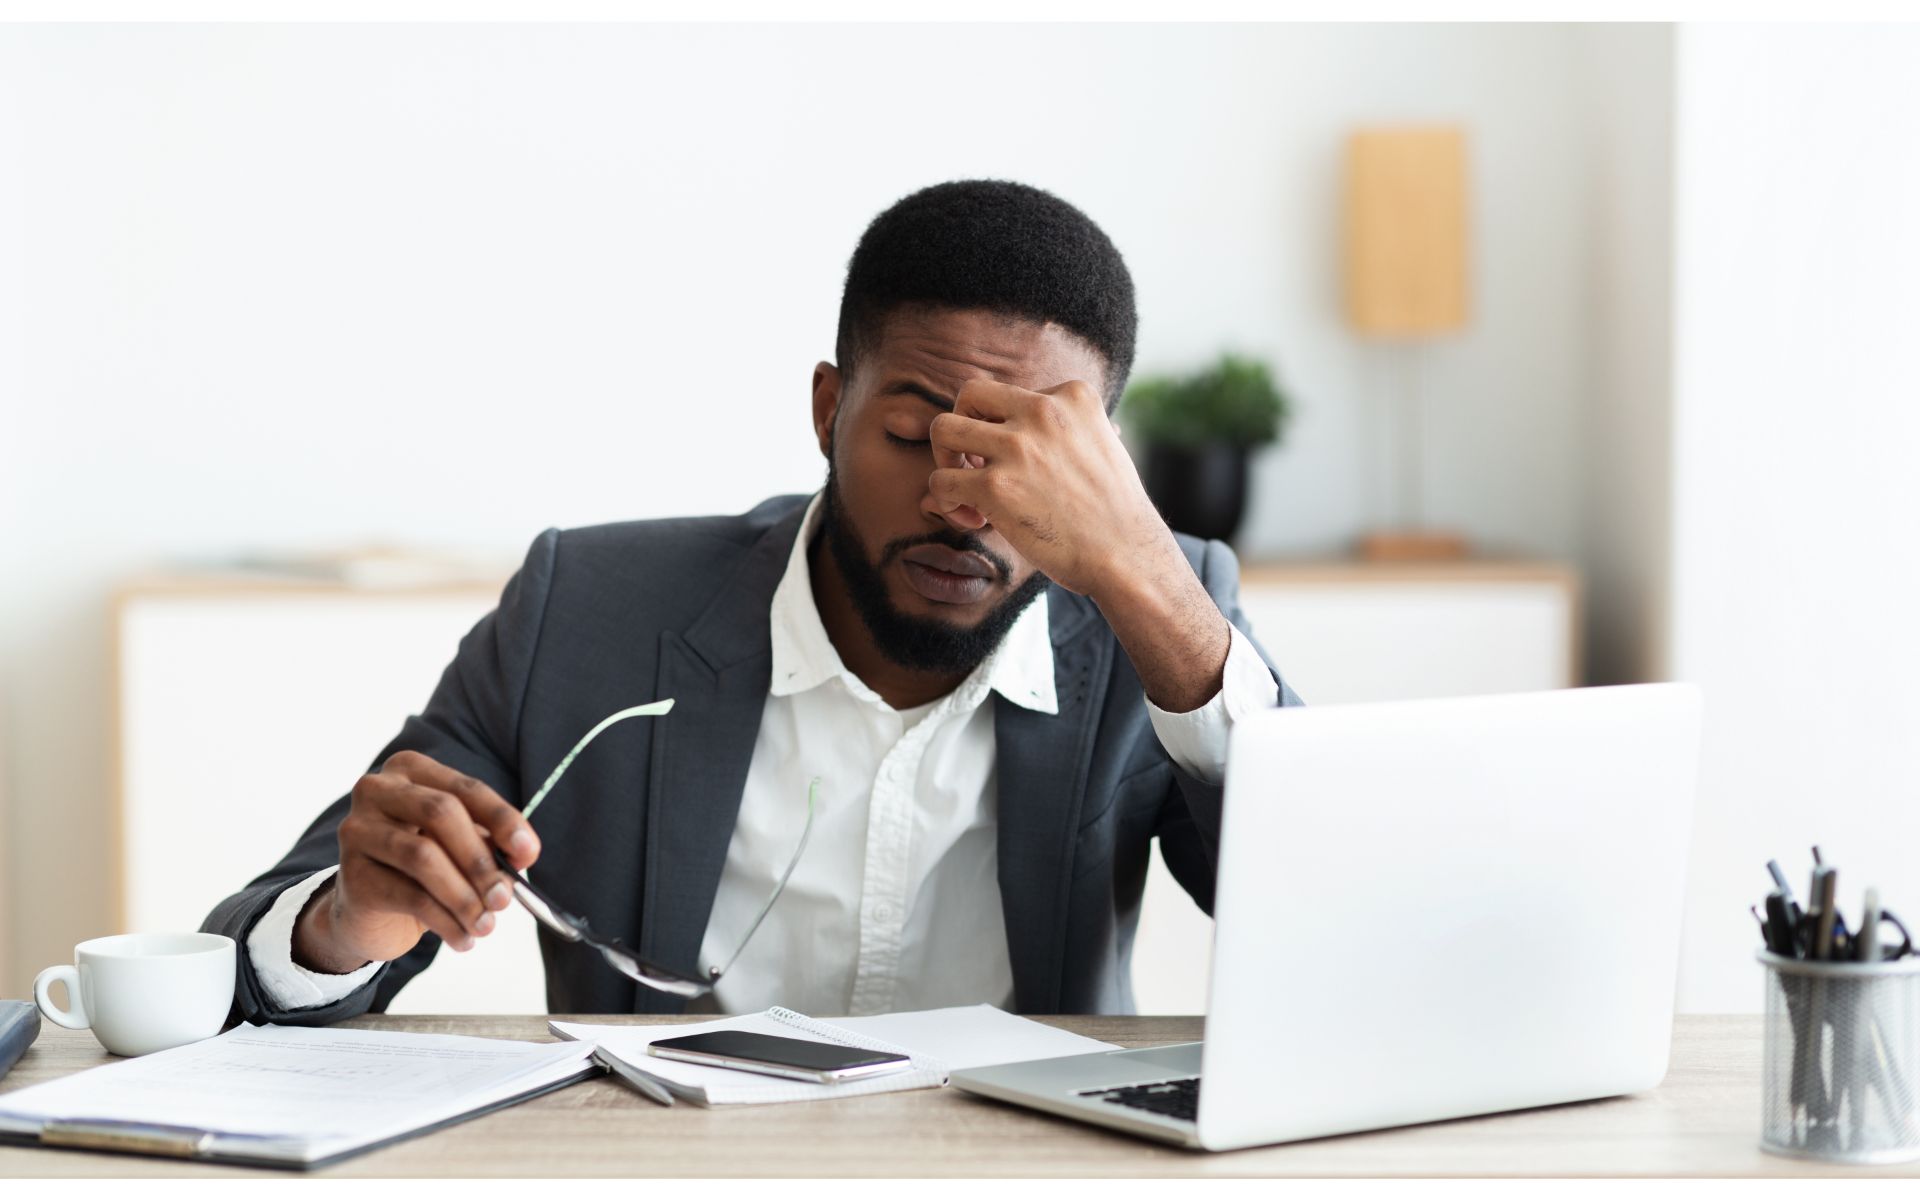 A frustrated man sits in front of the computer. Cover image for an article on managing career and caretaking.